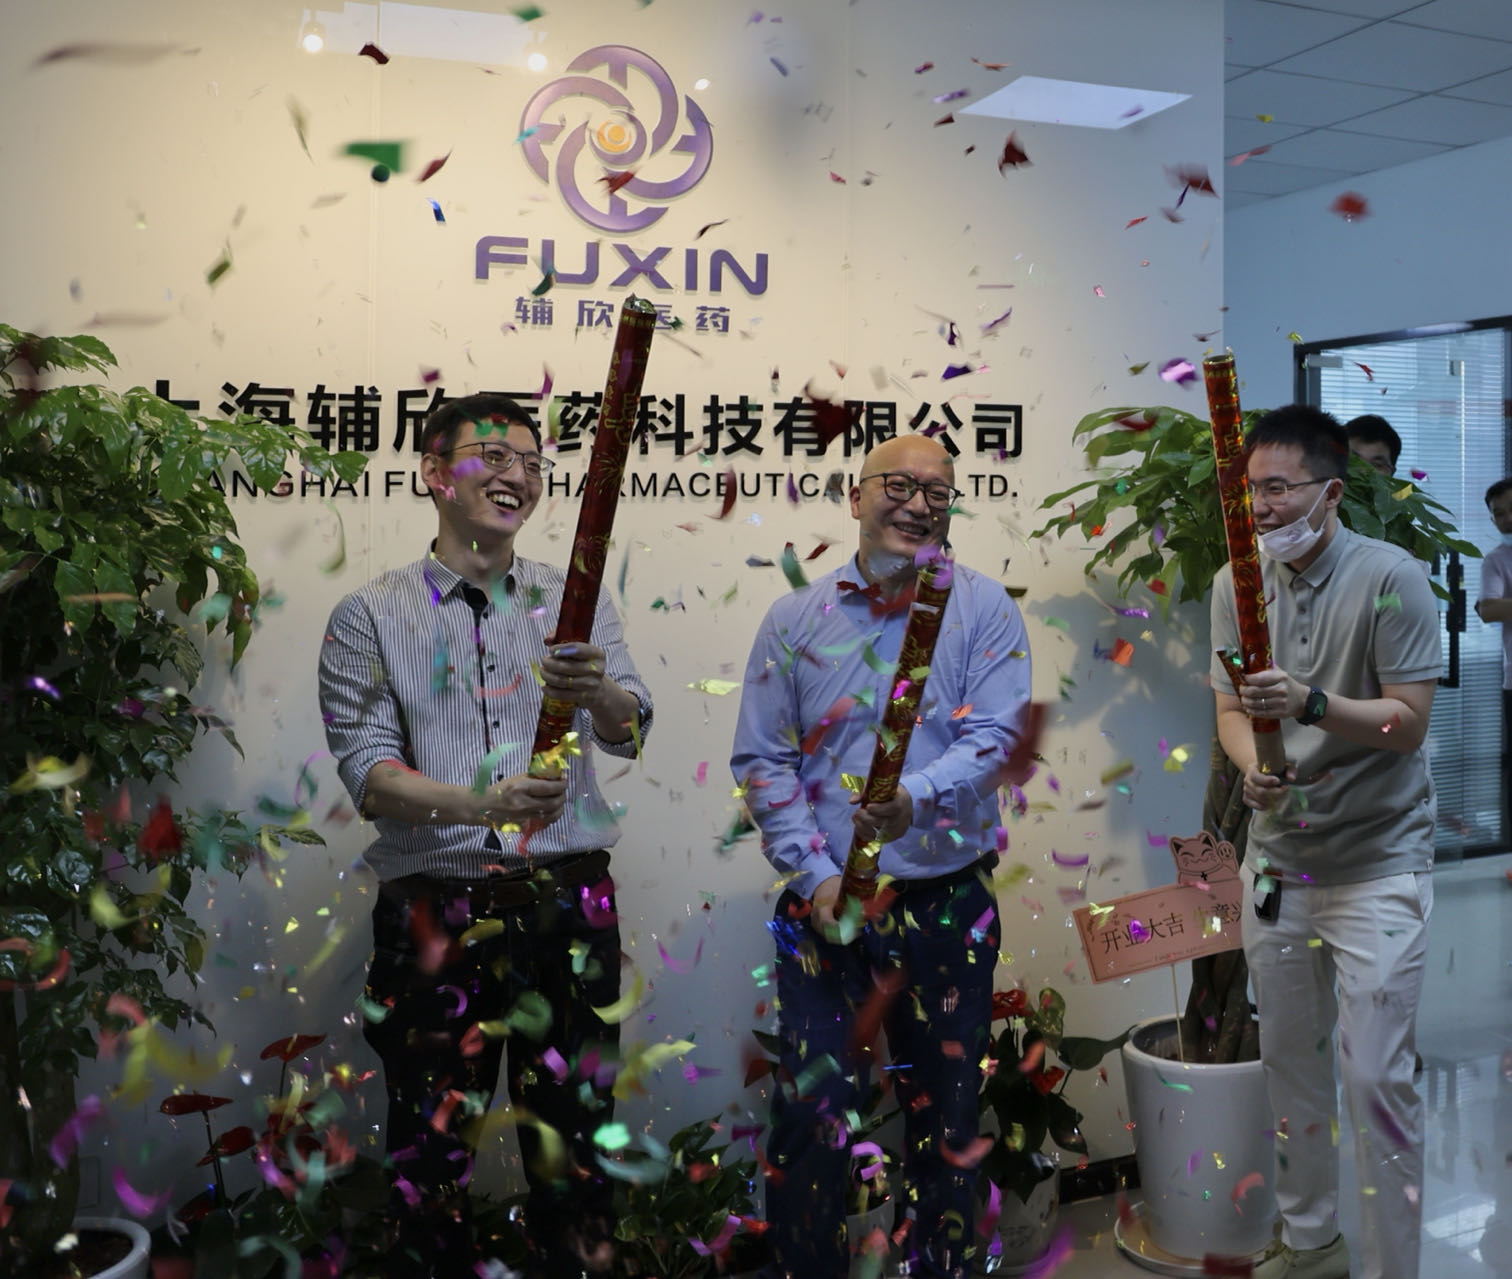 Hoisting the Sails and Larger New Brilliance |Opening Ceremony of Fuxin Pharmaceutical Pilot Laboratory